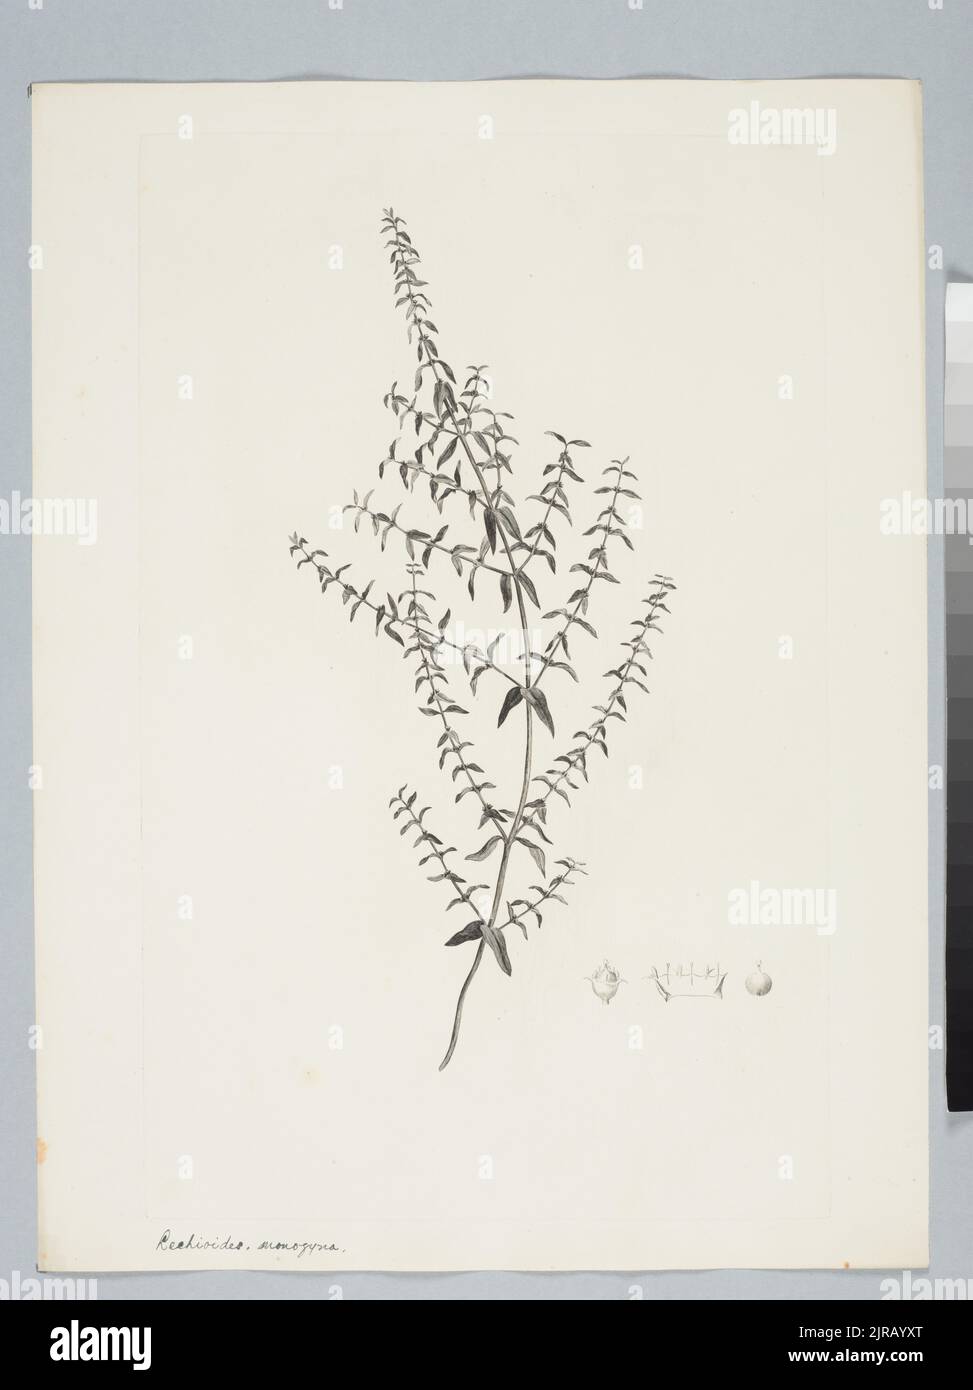 Rotala densiflora (Roth ex Roemer & Schultes) Koehne, by Sydney Parkinson. Gift of the British Museum, 1895. Stock Photo